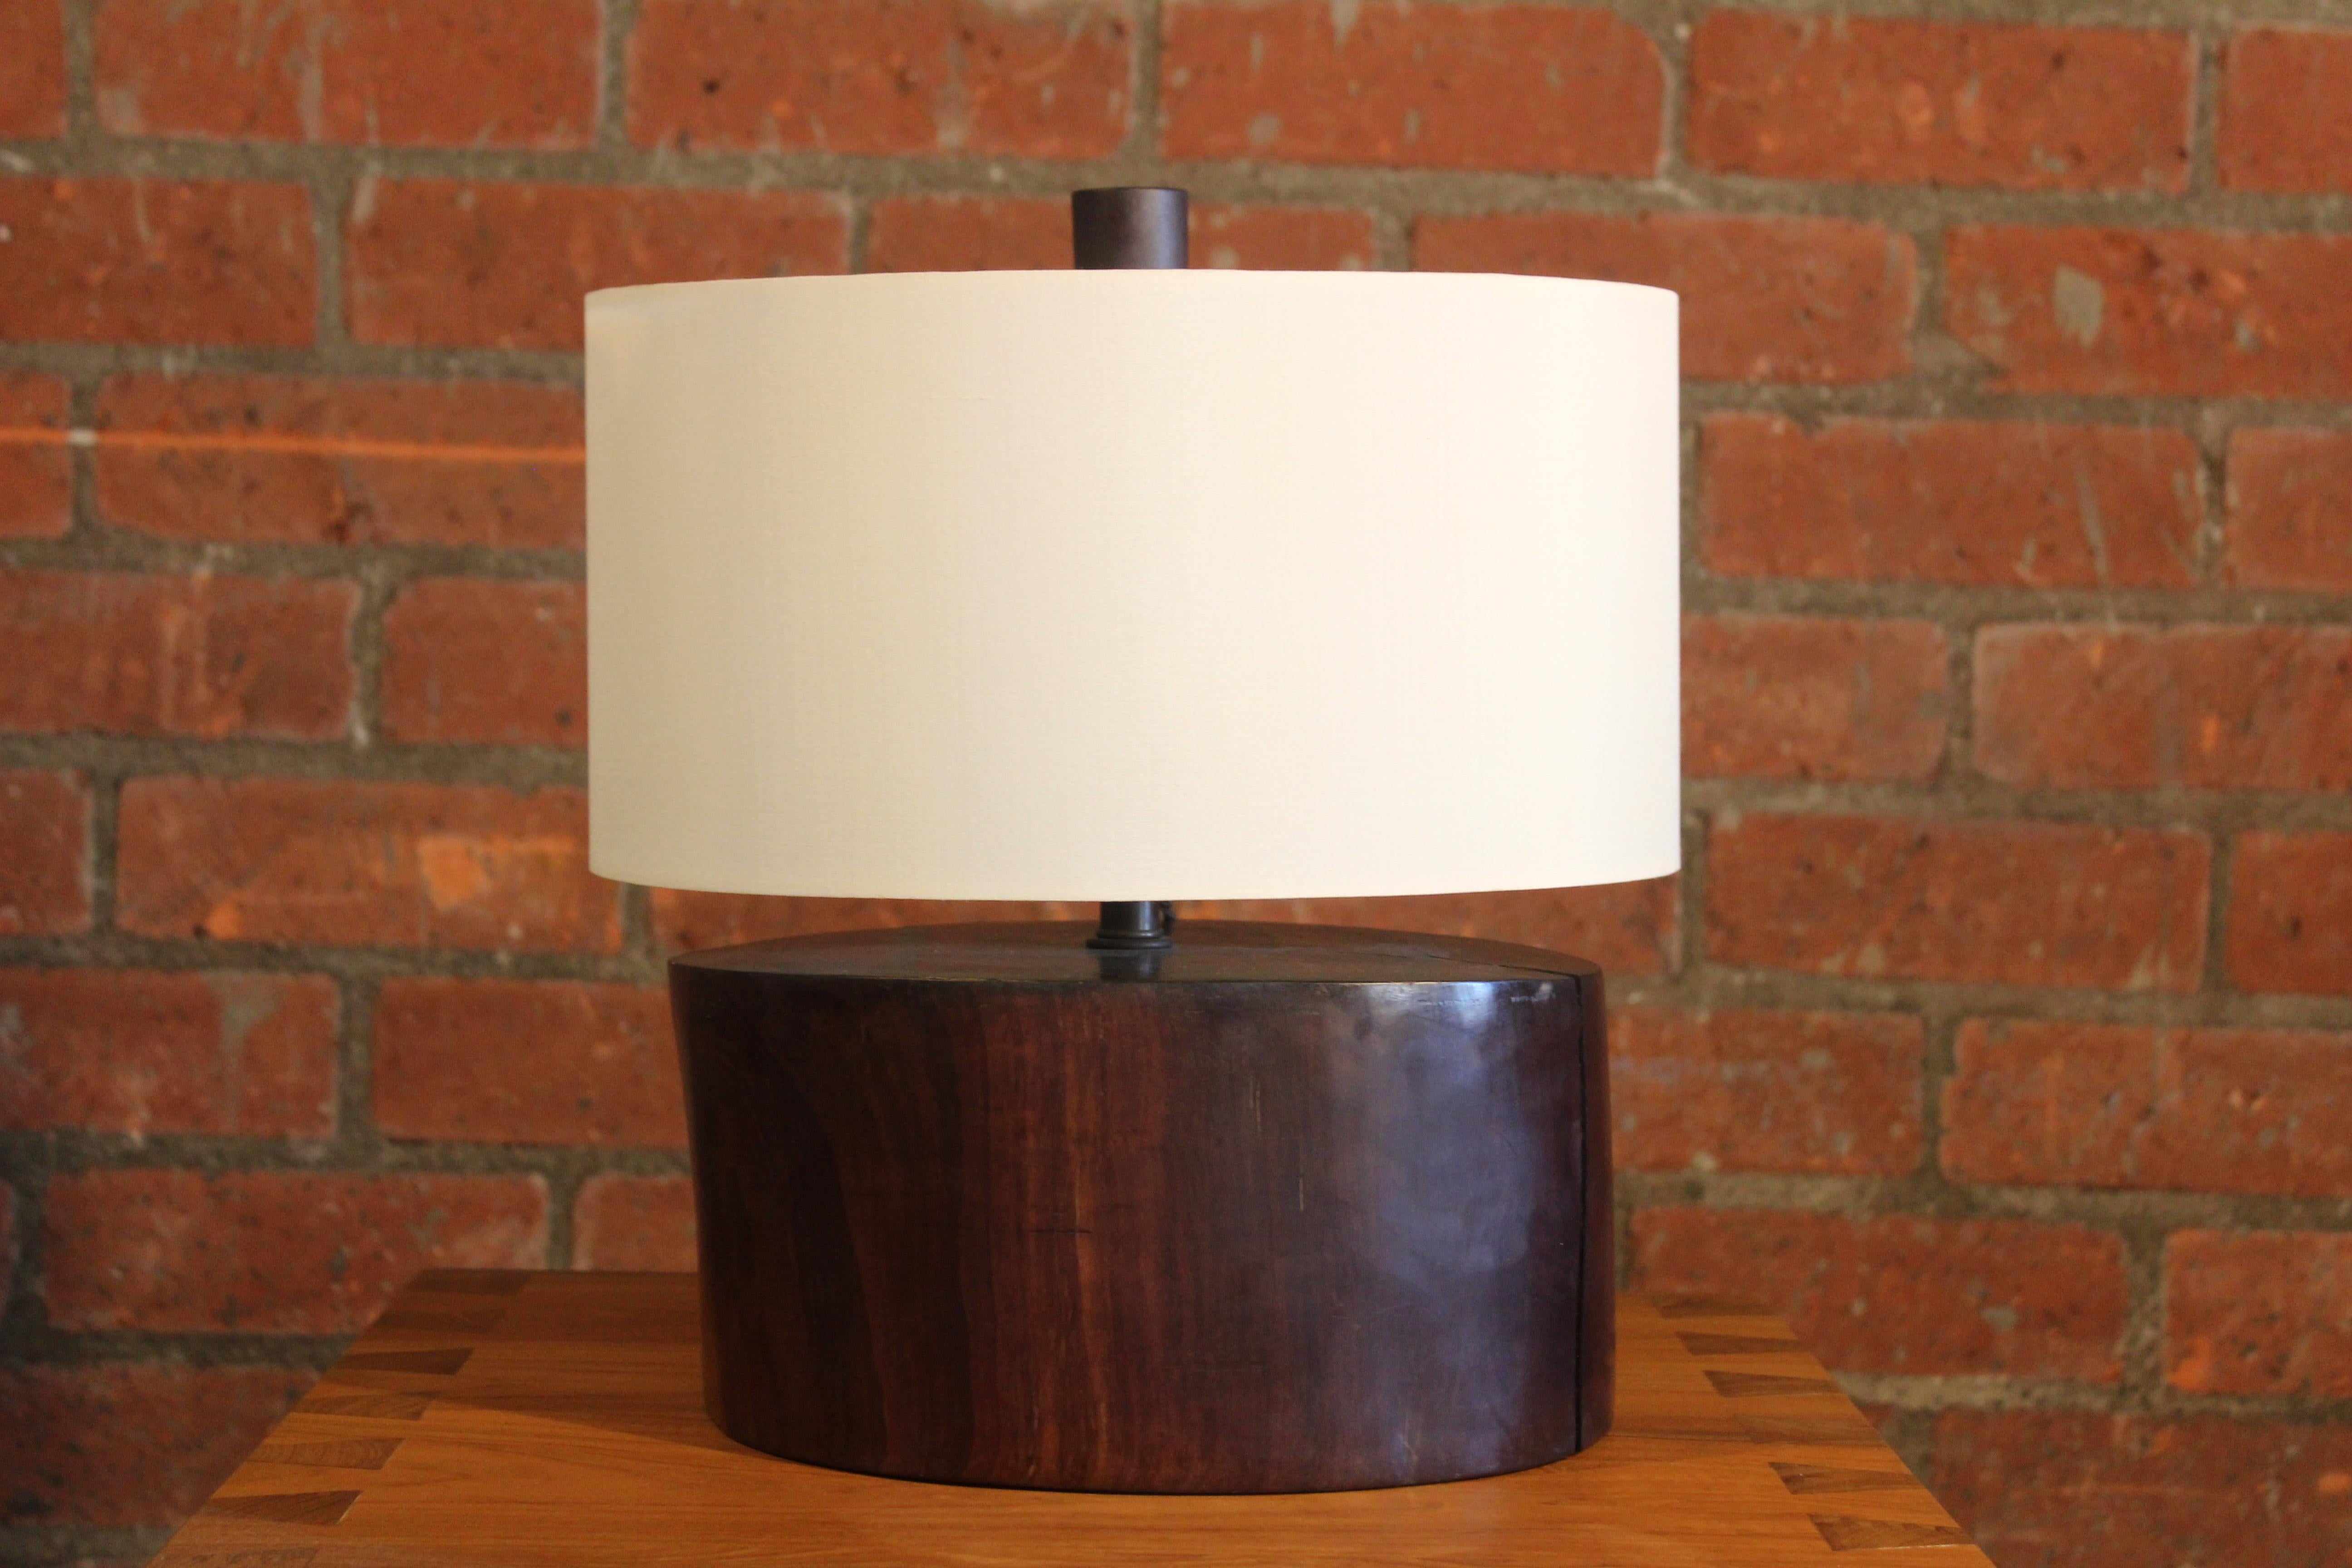 An ironwood stump table lamp, newly French wired and fitted with a custom shade in silk.